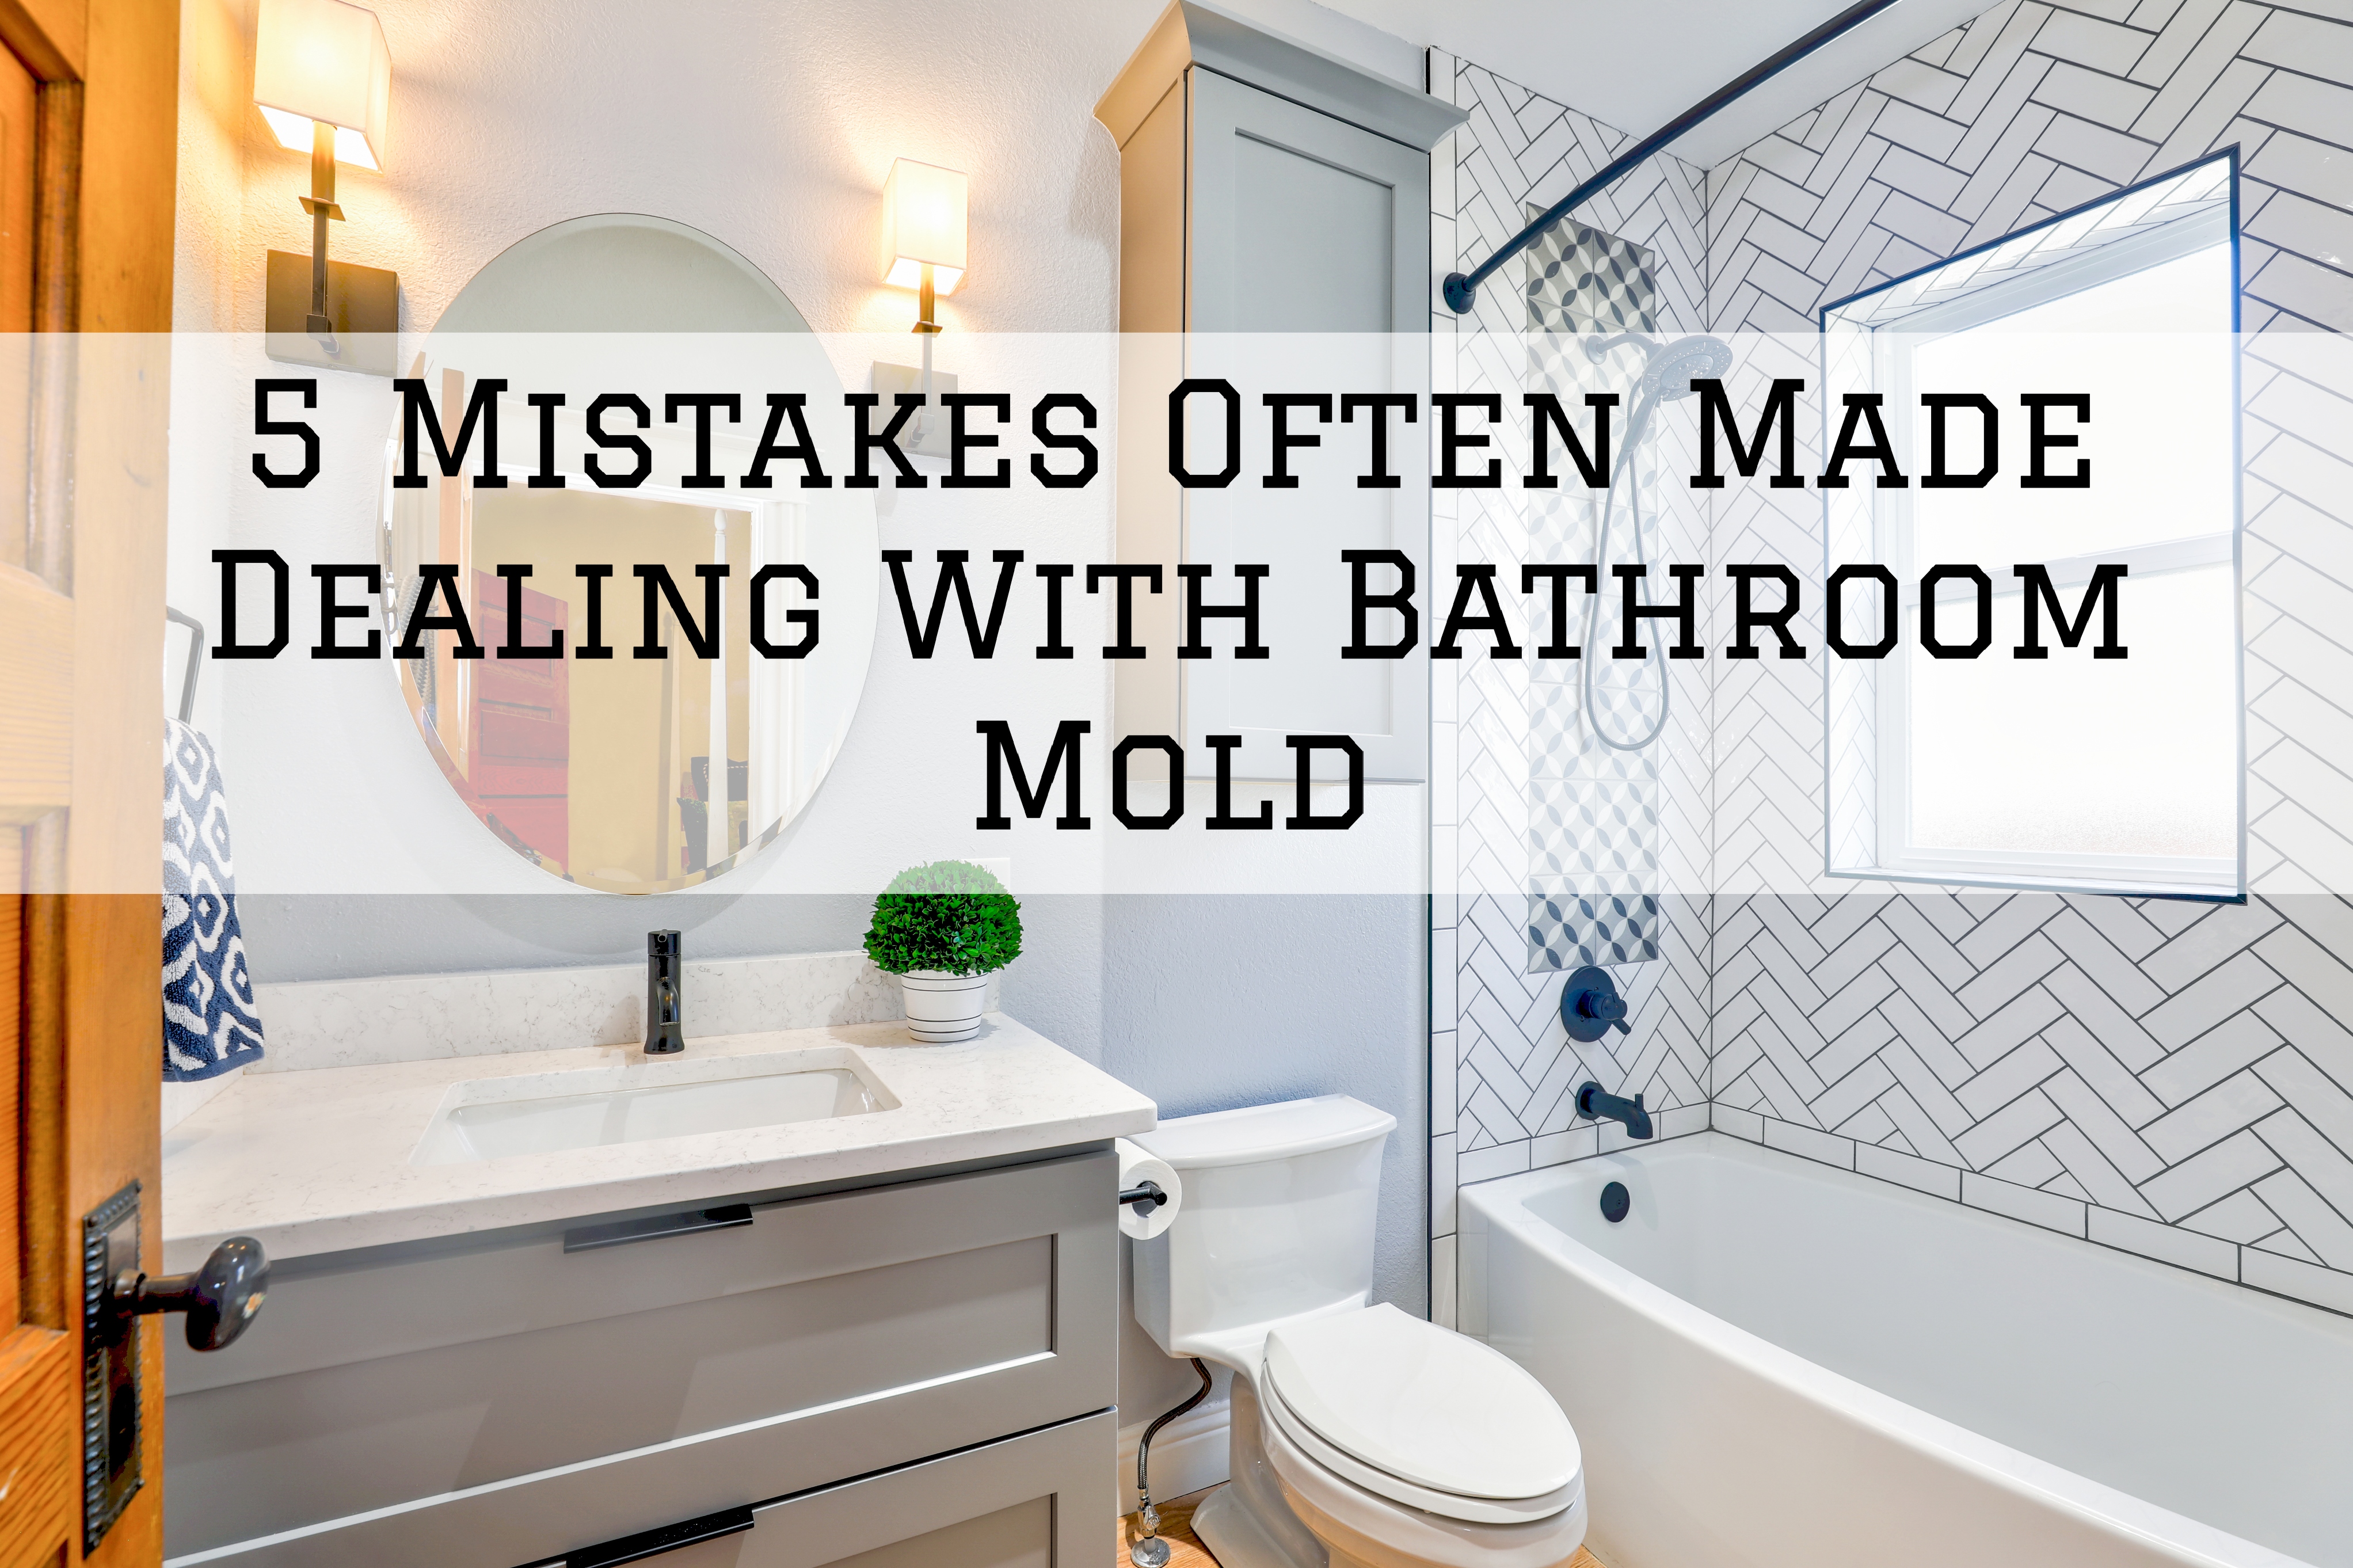 5 Mistakes Often Made Dealing With Bathroom Mold in Ottawa, Ontario